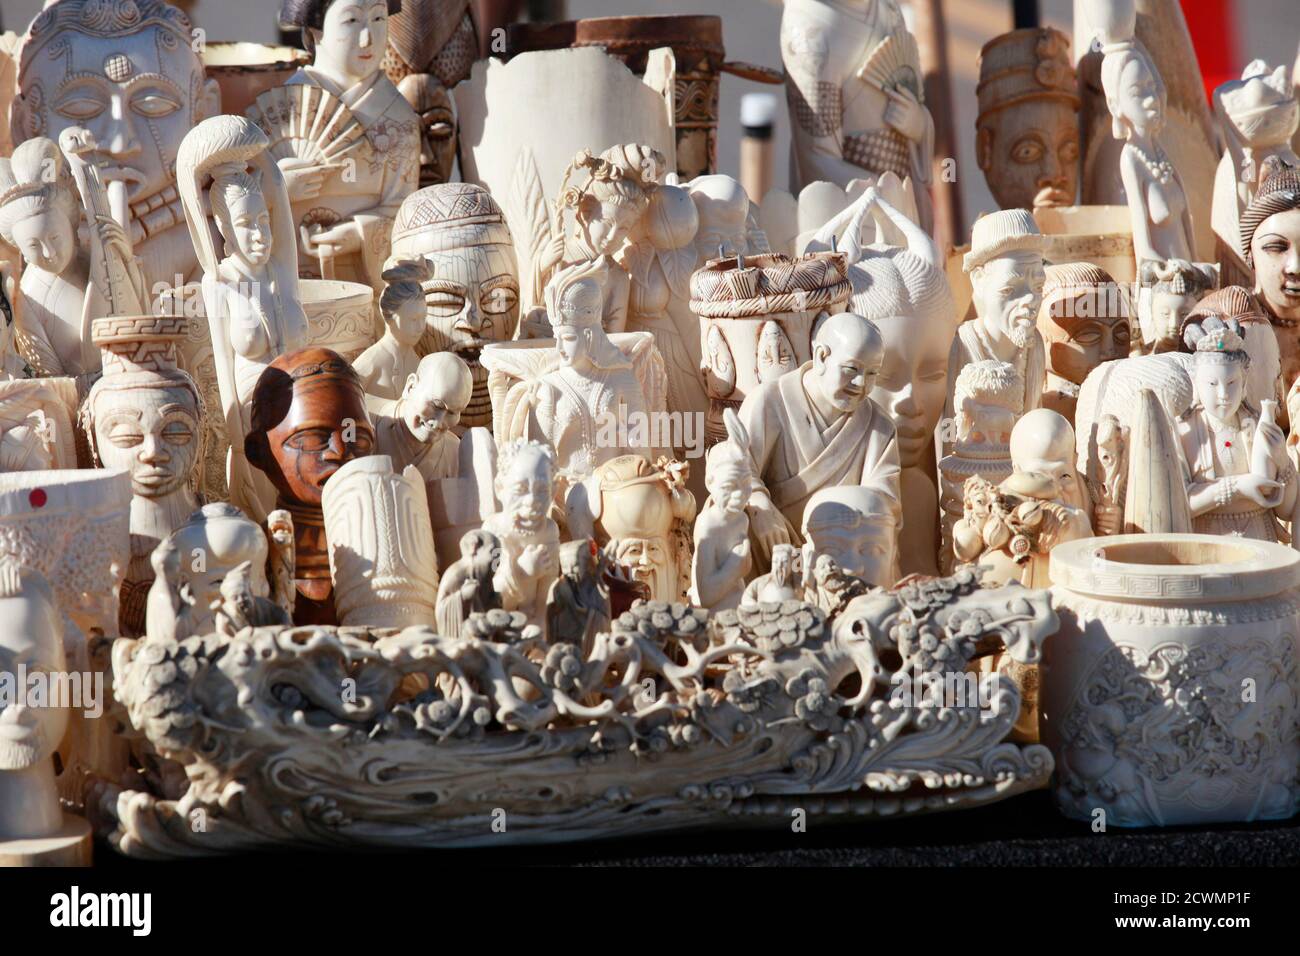 Dozens of confiscated carved ivory sculptures are displayed before 6 tons of ivory was crushed in Denver, Colorado November 14, 2013.  The U.S. Fish and Wildlife Service organized the crushing. REUTERS/Rick Wilking (UNITED STATES - Tags: CRIME LAW ANIMALS) Stock Photo